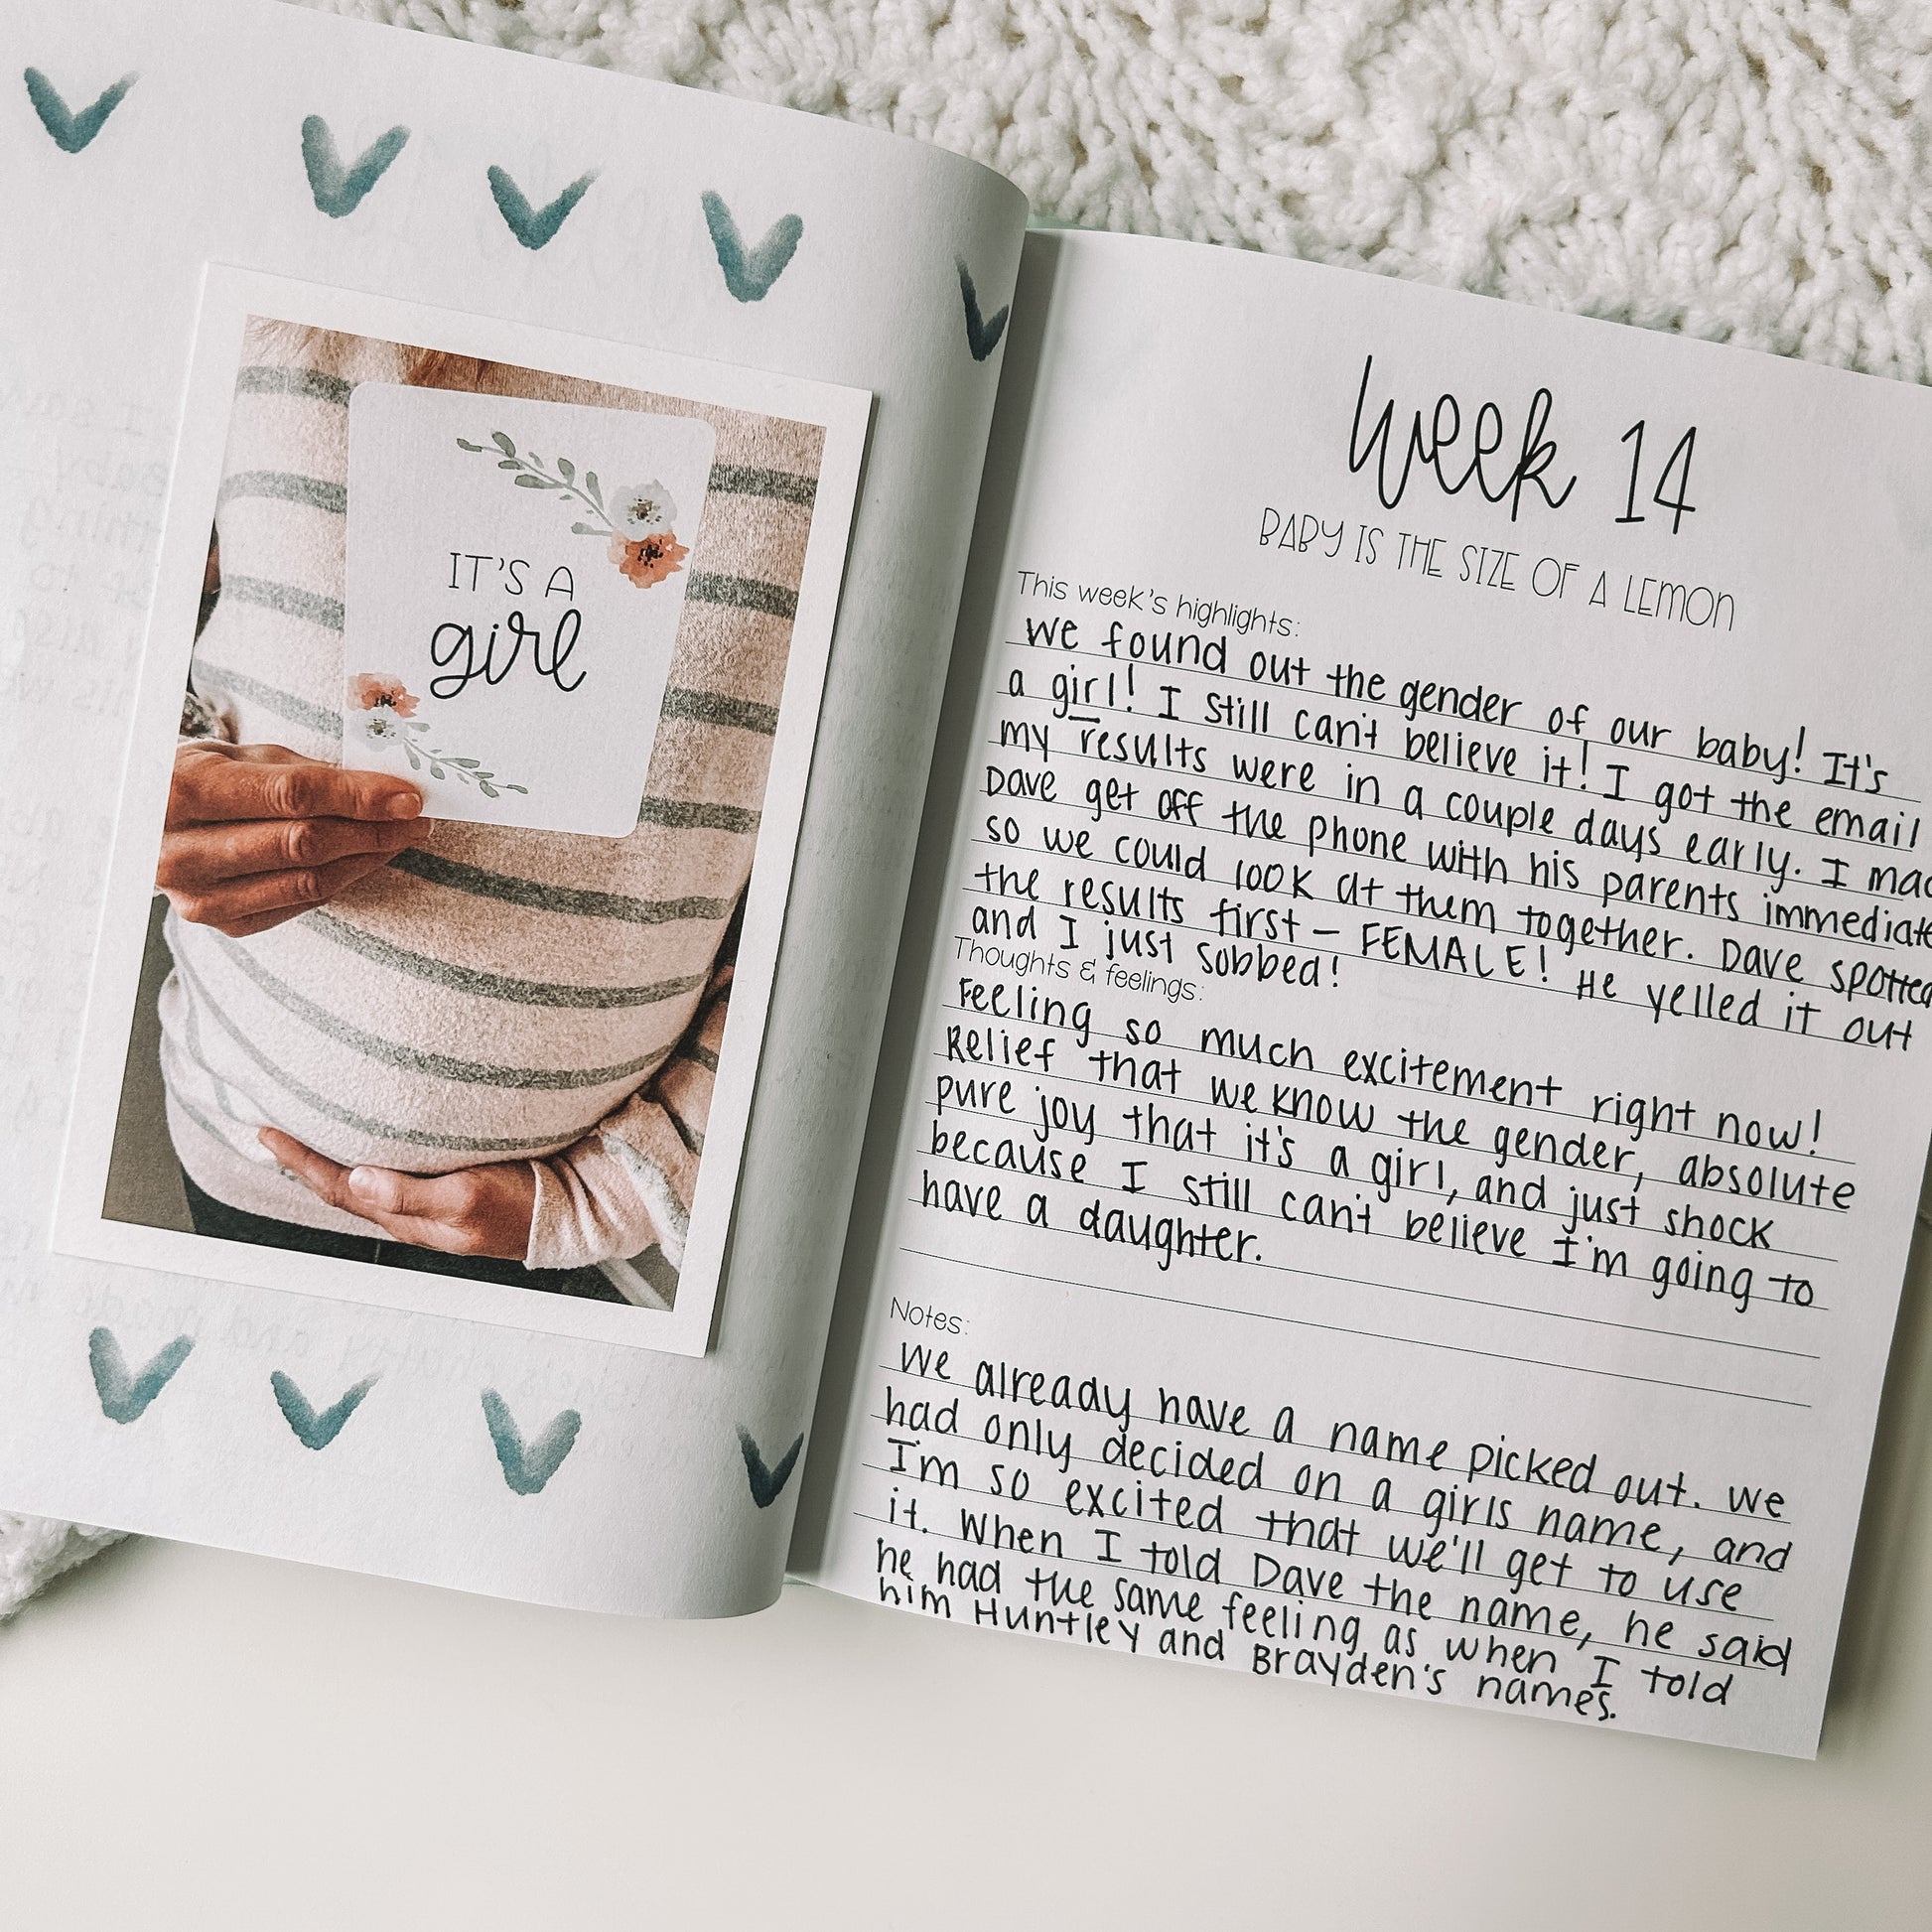 Two page spread features a photo of a pregnant person holding her belly and a card that reads It's a Girl on the left page. The right page reads Week 14 with three prompts.